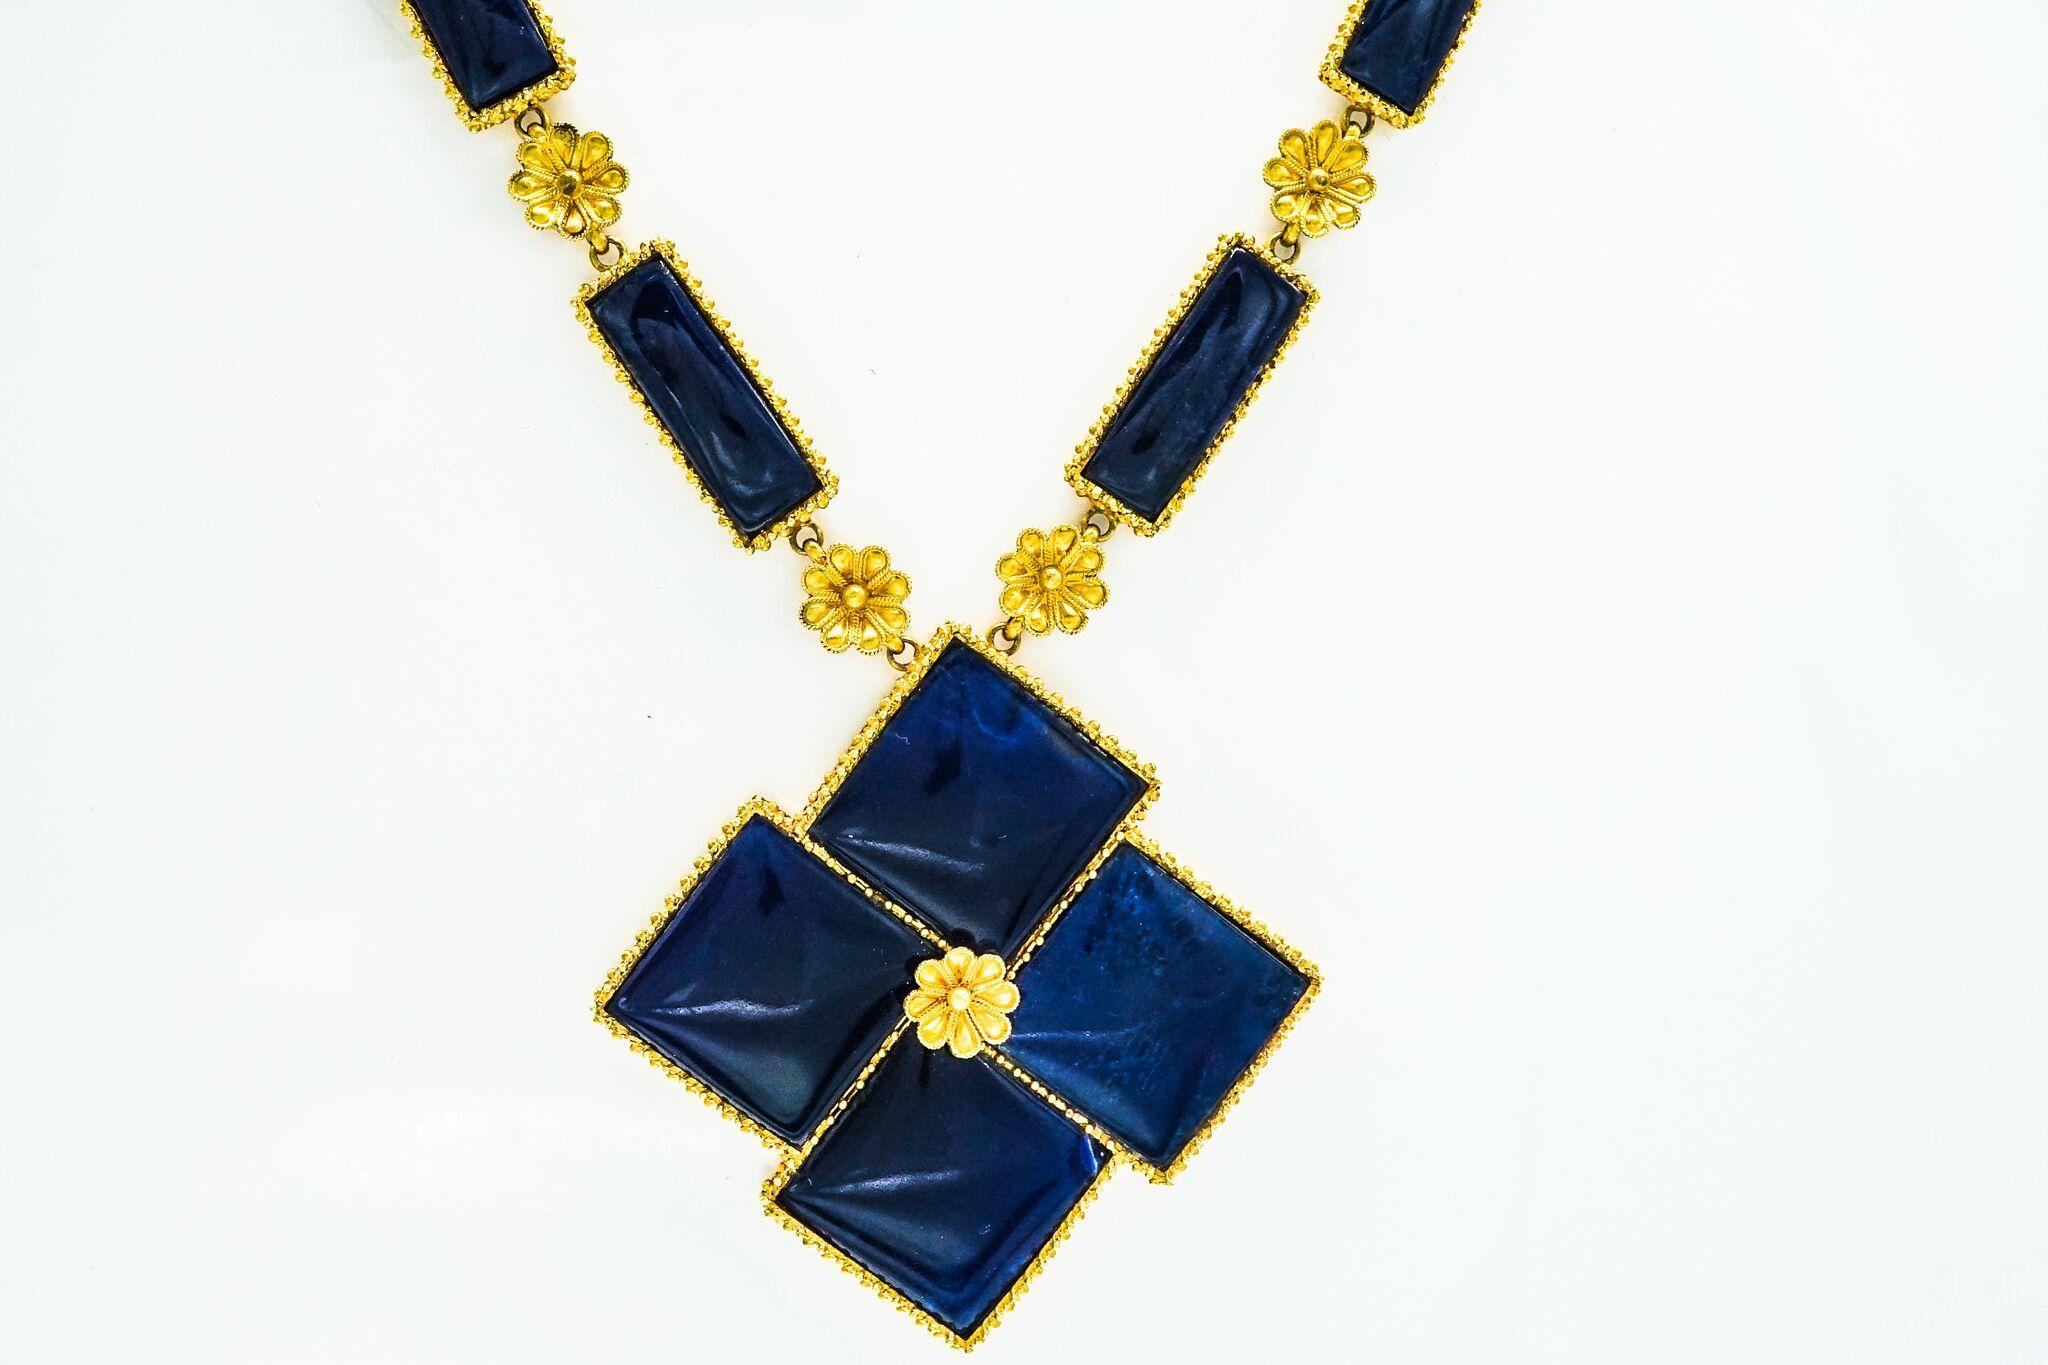 This beautiful piece features rectangular sodalite links within granulated frames spaced by concave florets, the suspending pendant takes the form of a four square-shaped off-set sodalitie centering one floret, signed Llias Lalaounis, with makers's